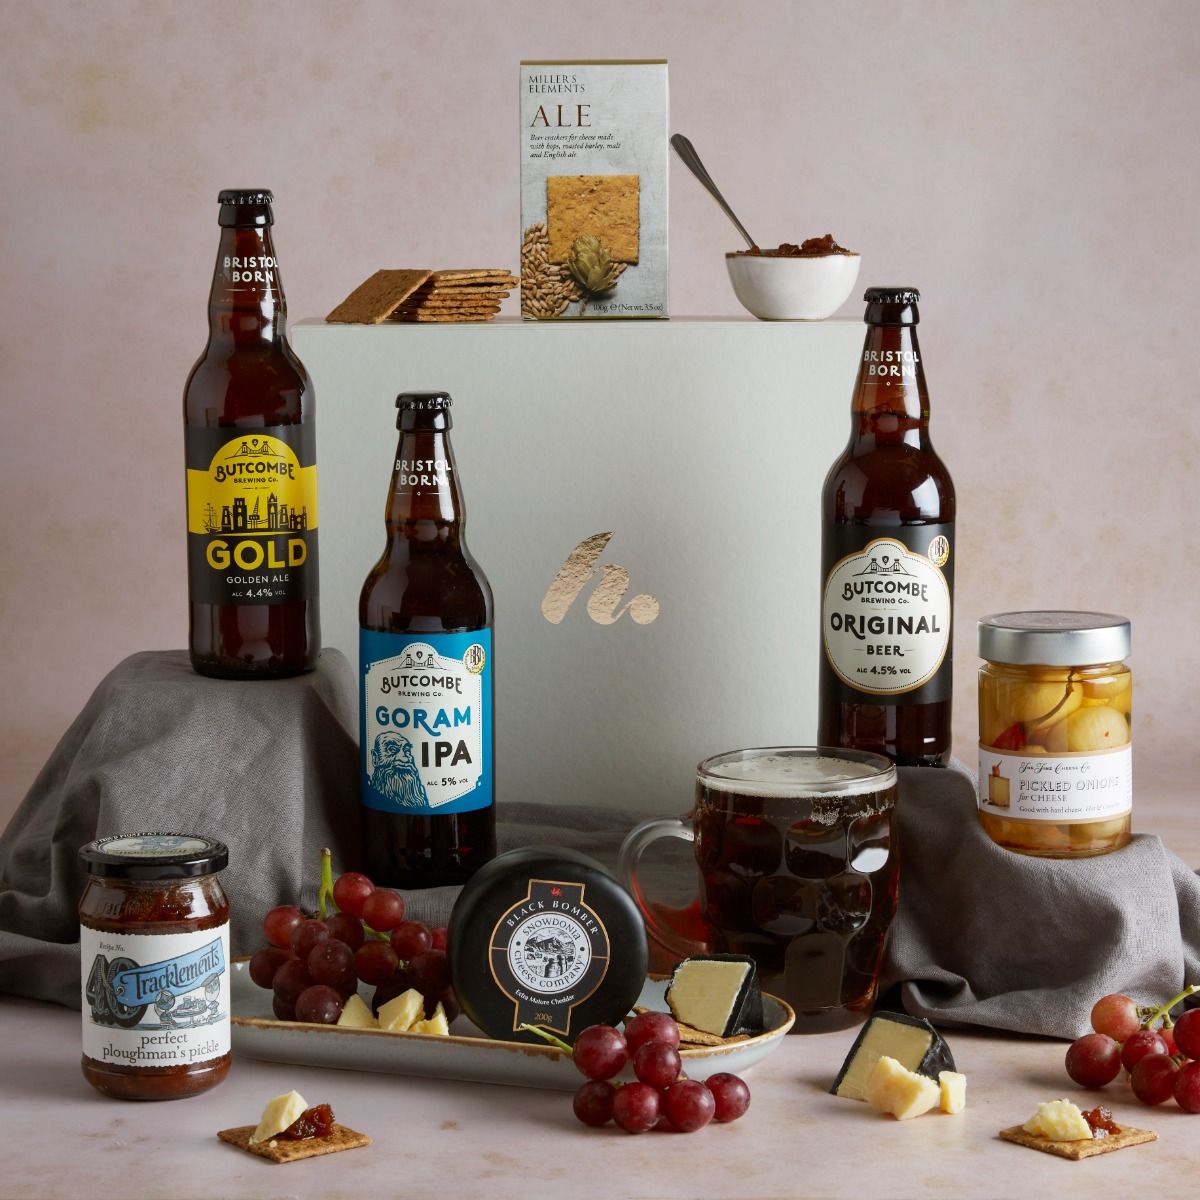 Ploughman's Beer & Cheese Hamper with contents on display - perfect giftbox for Father's Day